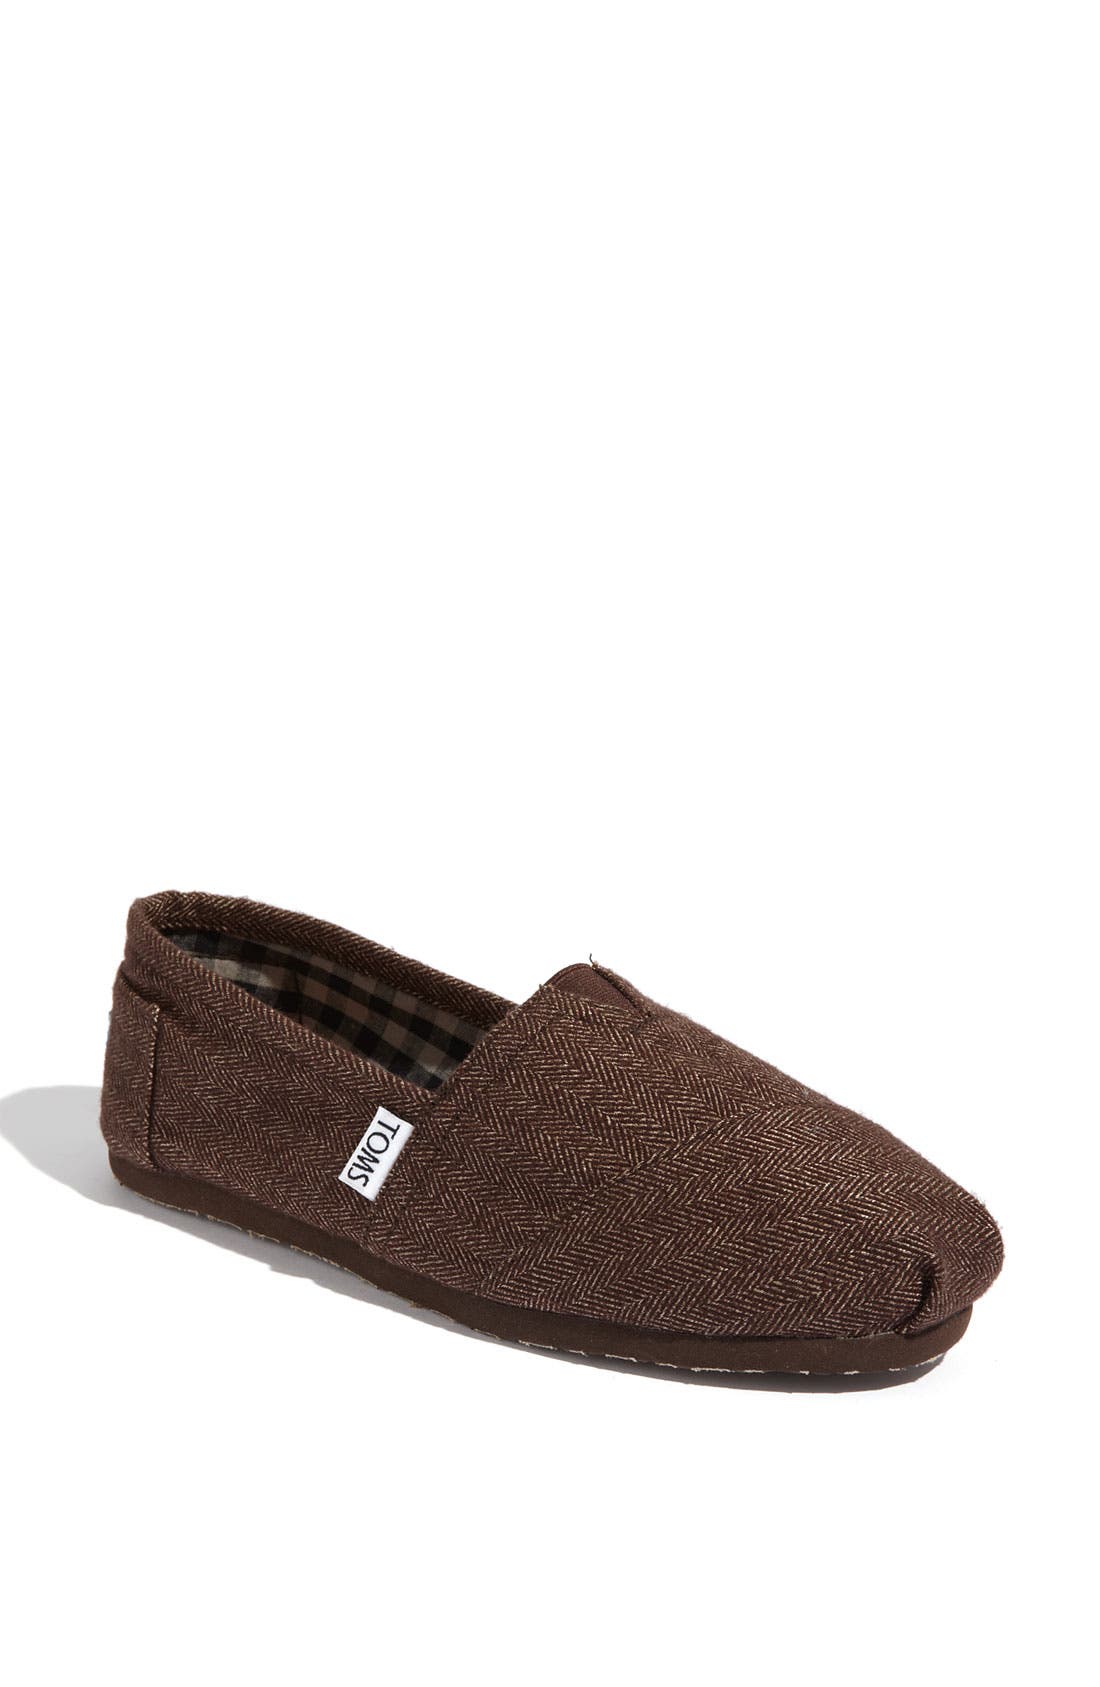 sherpa lined toms